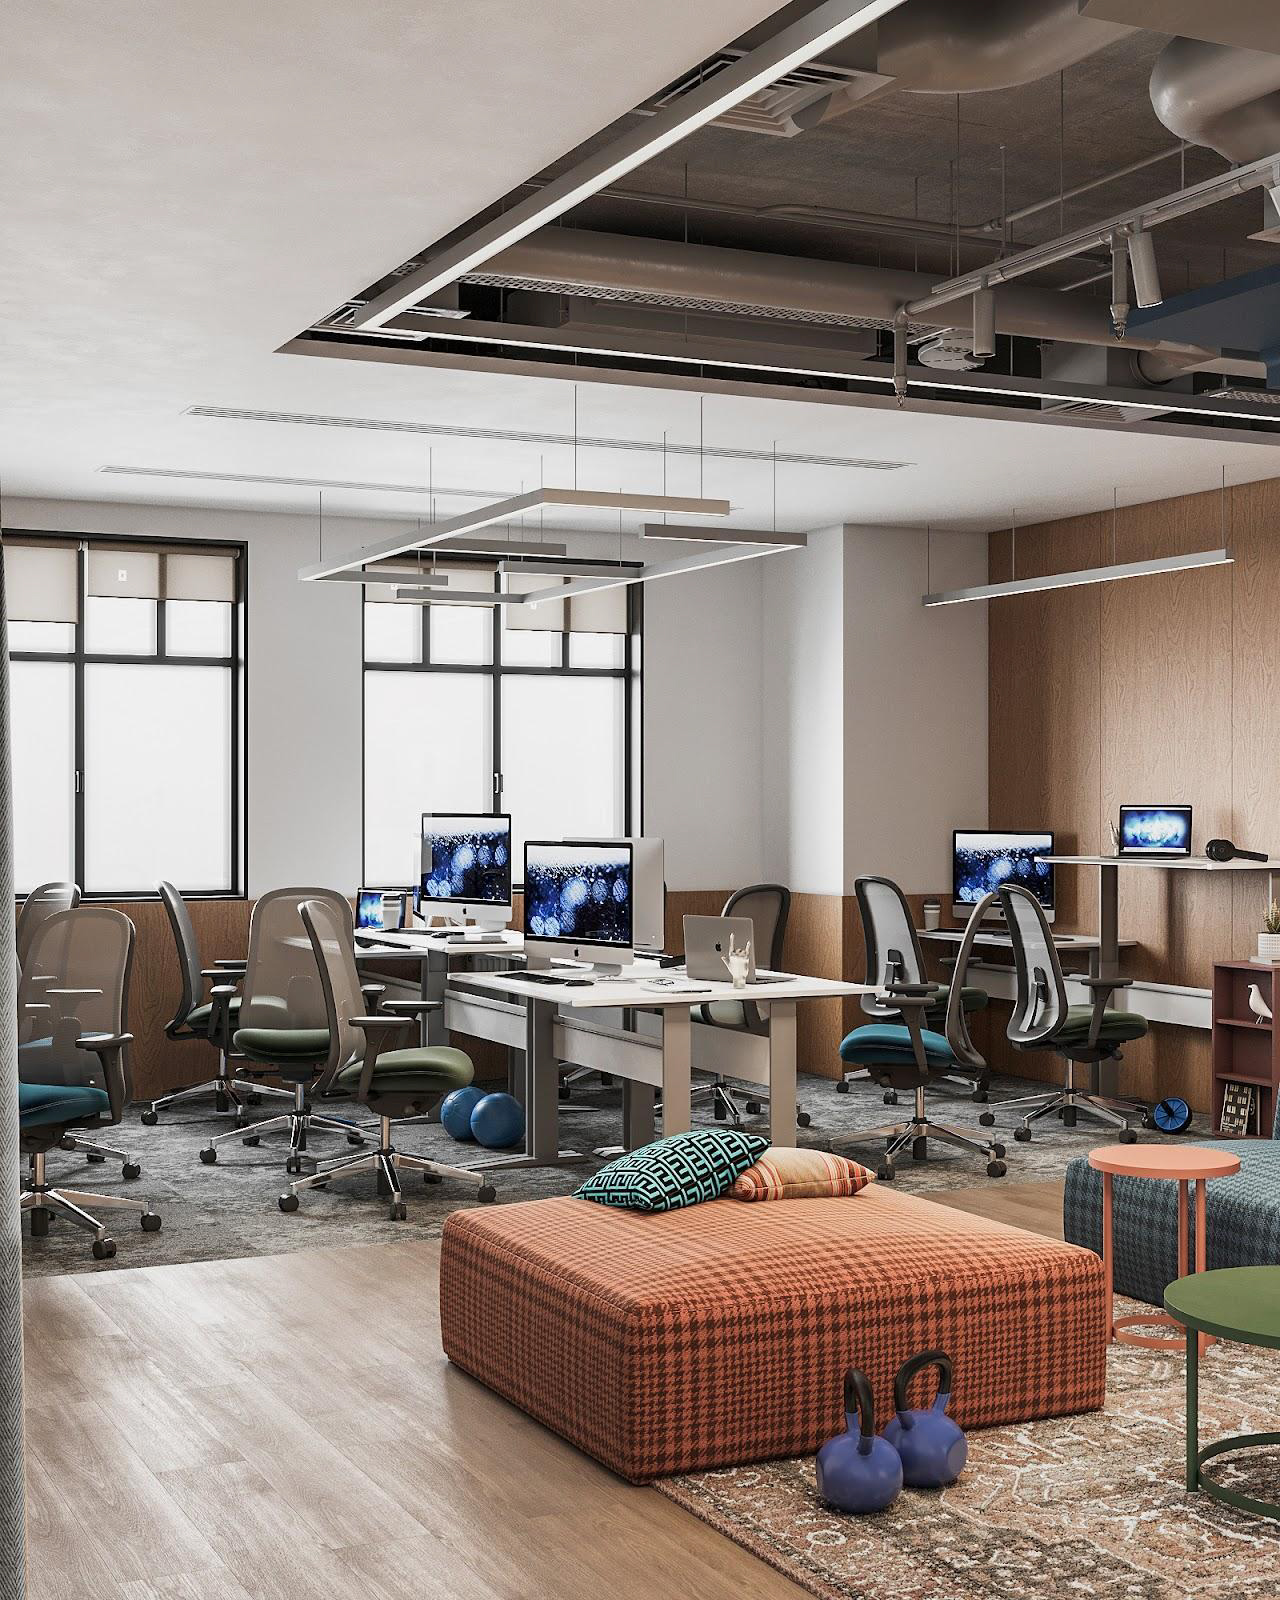 Return to Offices: Trends in Workplace Interior Design